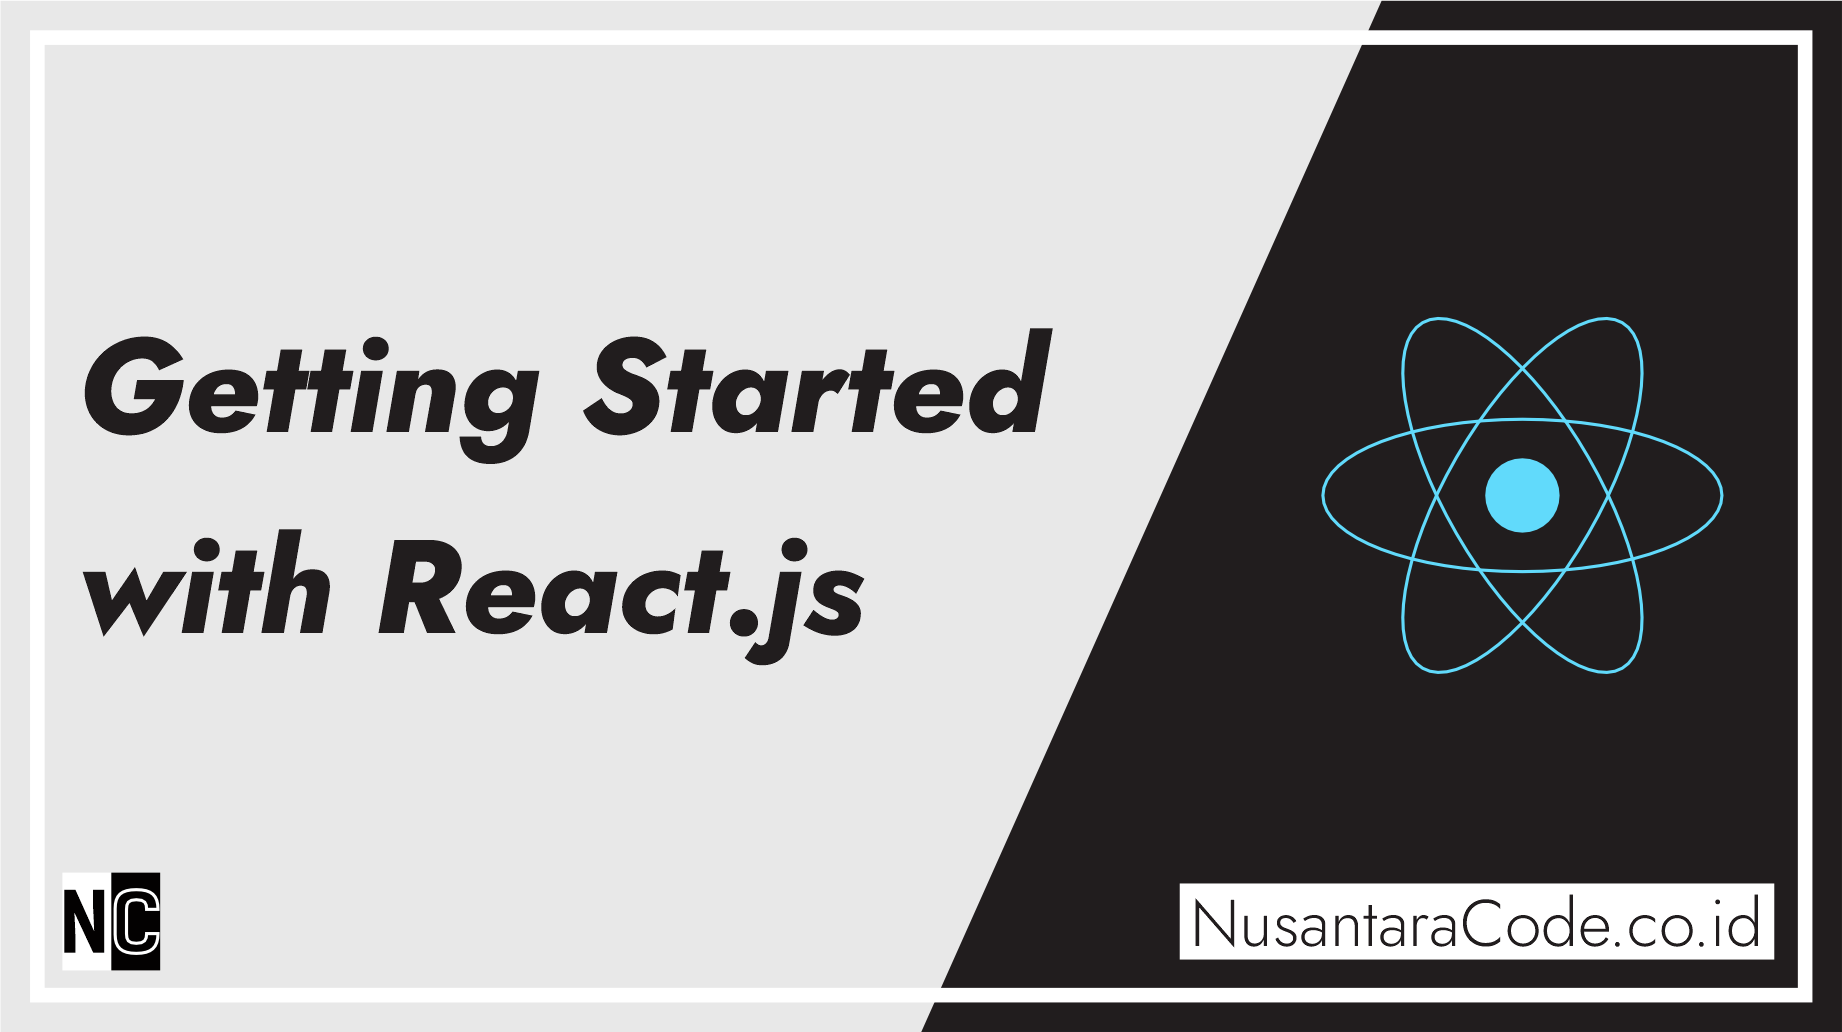 Getting Started with React.js: A Beginner’s Guide